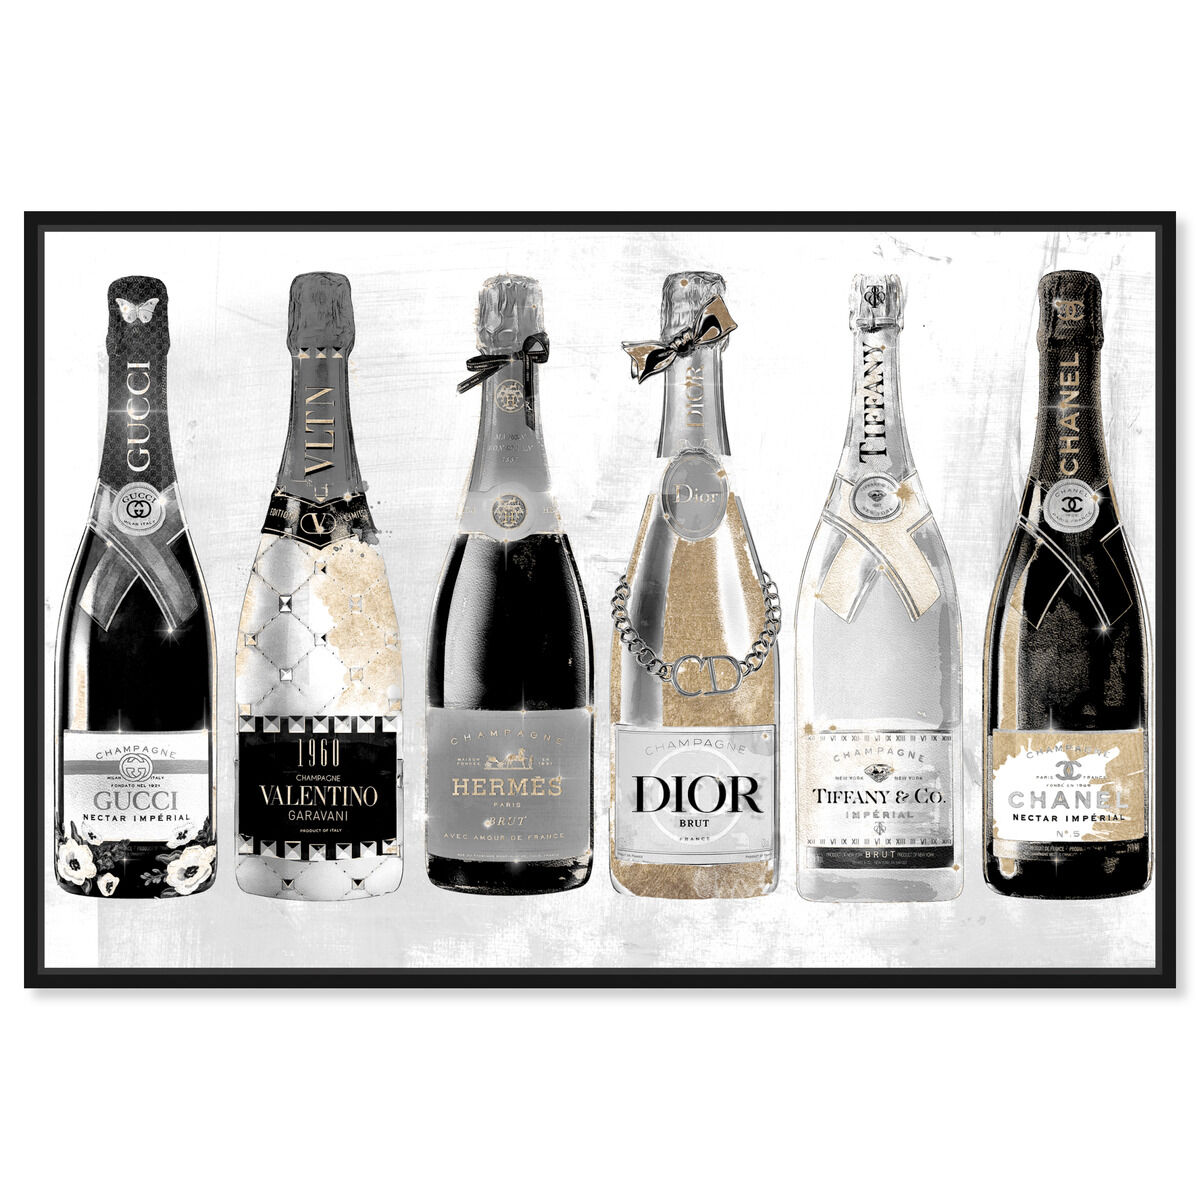 NEW VEUVE CLICQUOT ROSE CHAMPAGNE WALL ART WHITE PARIS FRANCE OLIVER GAL 10 X 15 